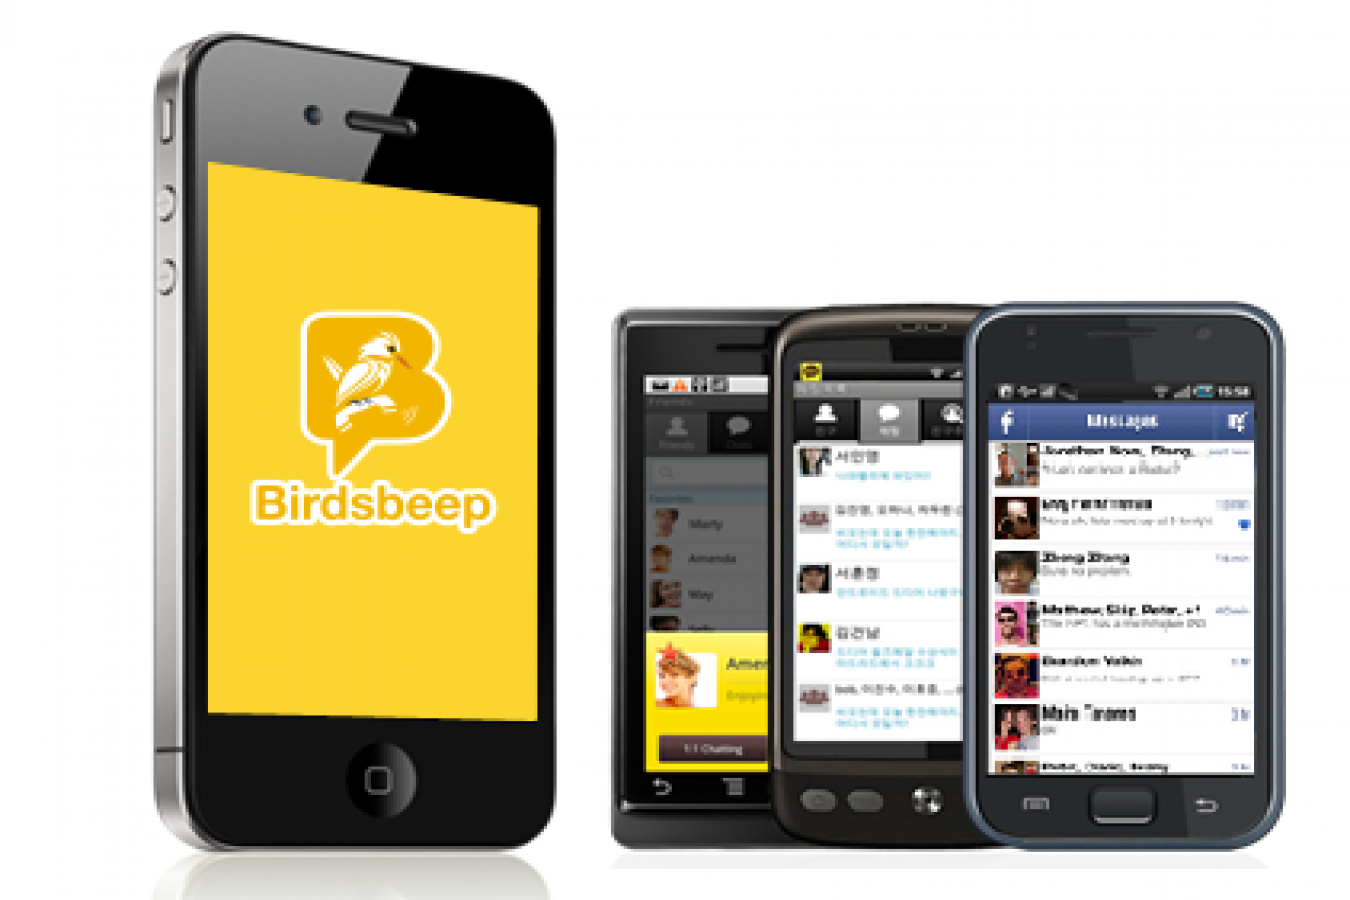 instant messaging applications